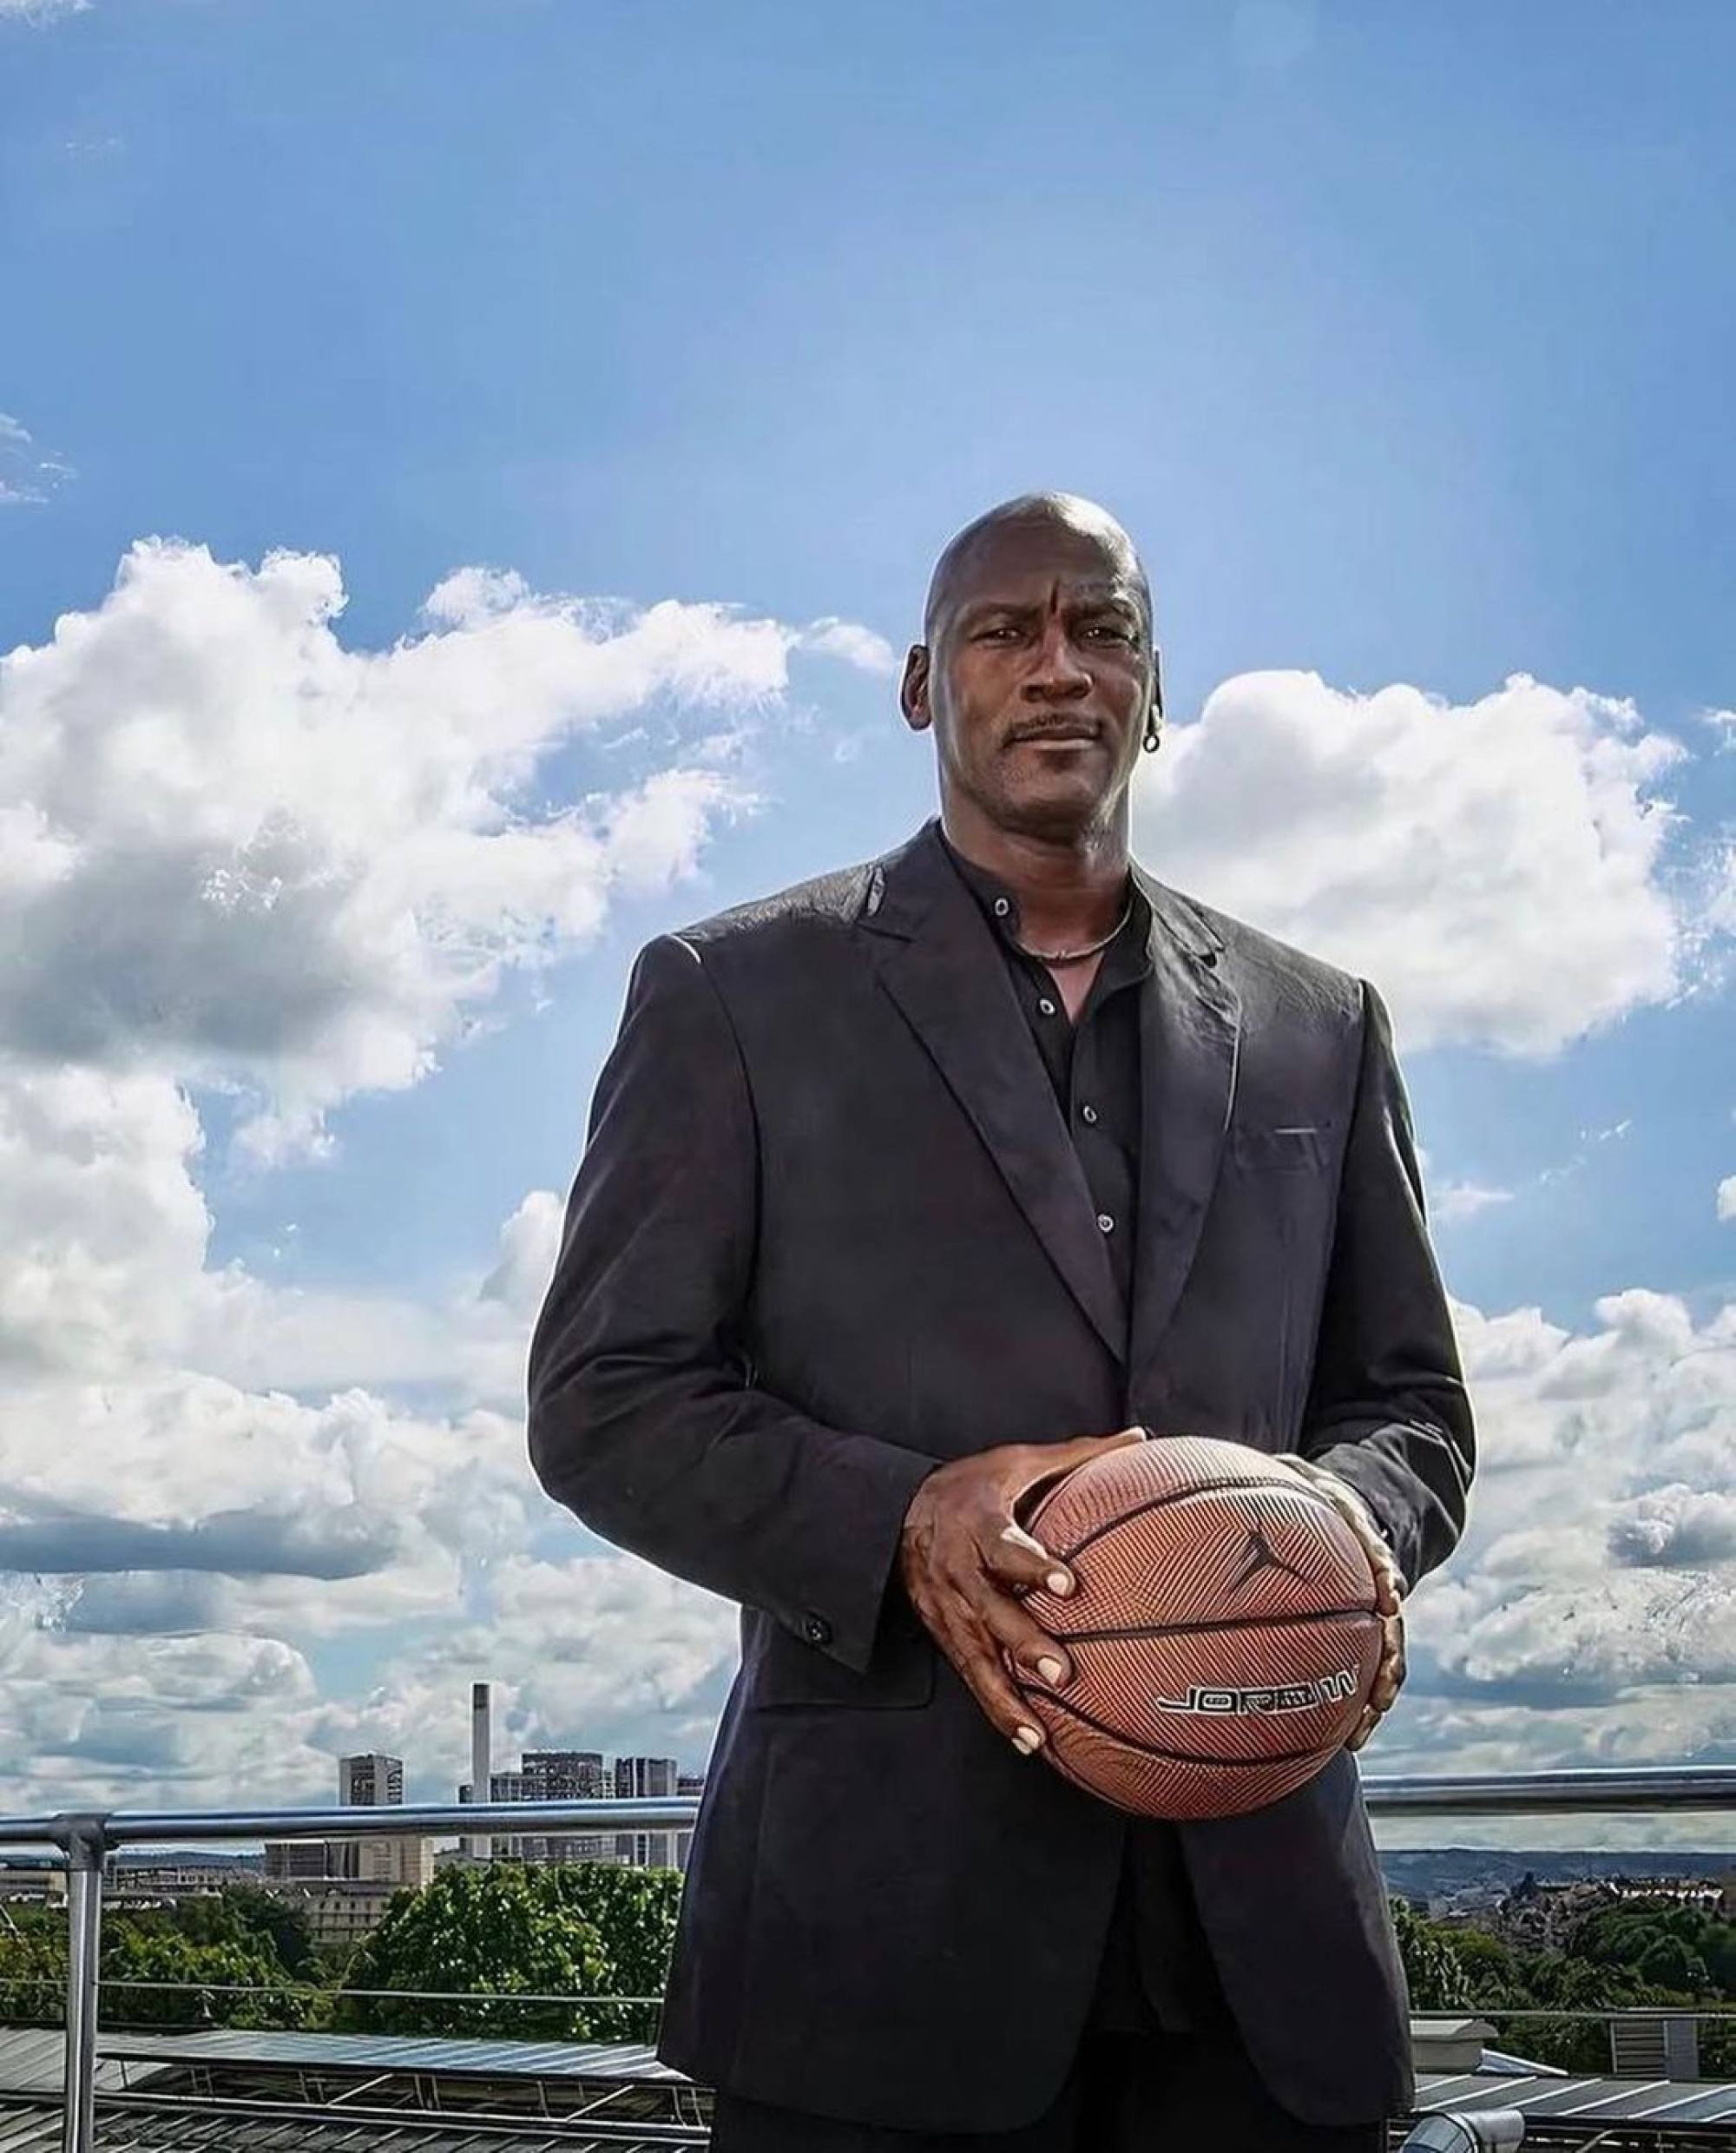 Sotheby's 'The Dynasty Collection' presents Michael Jordan's game